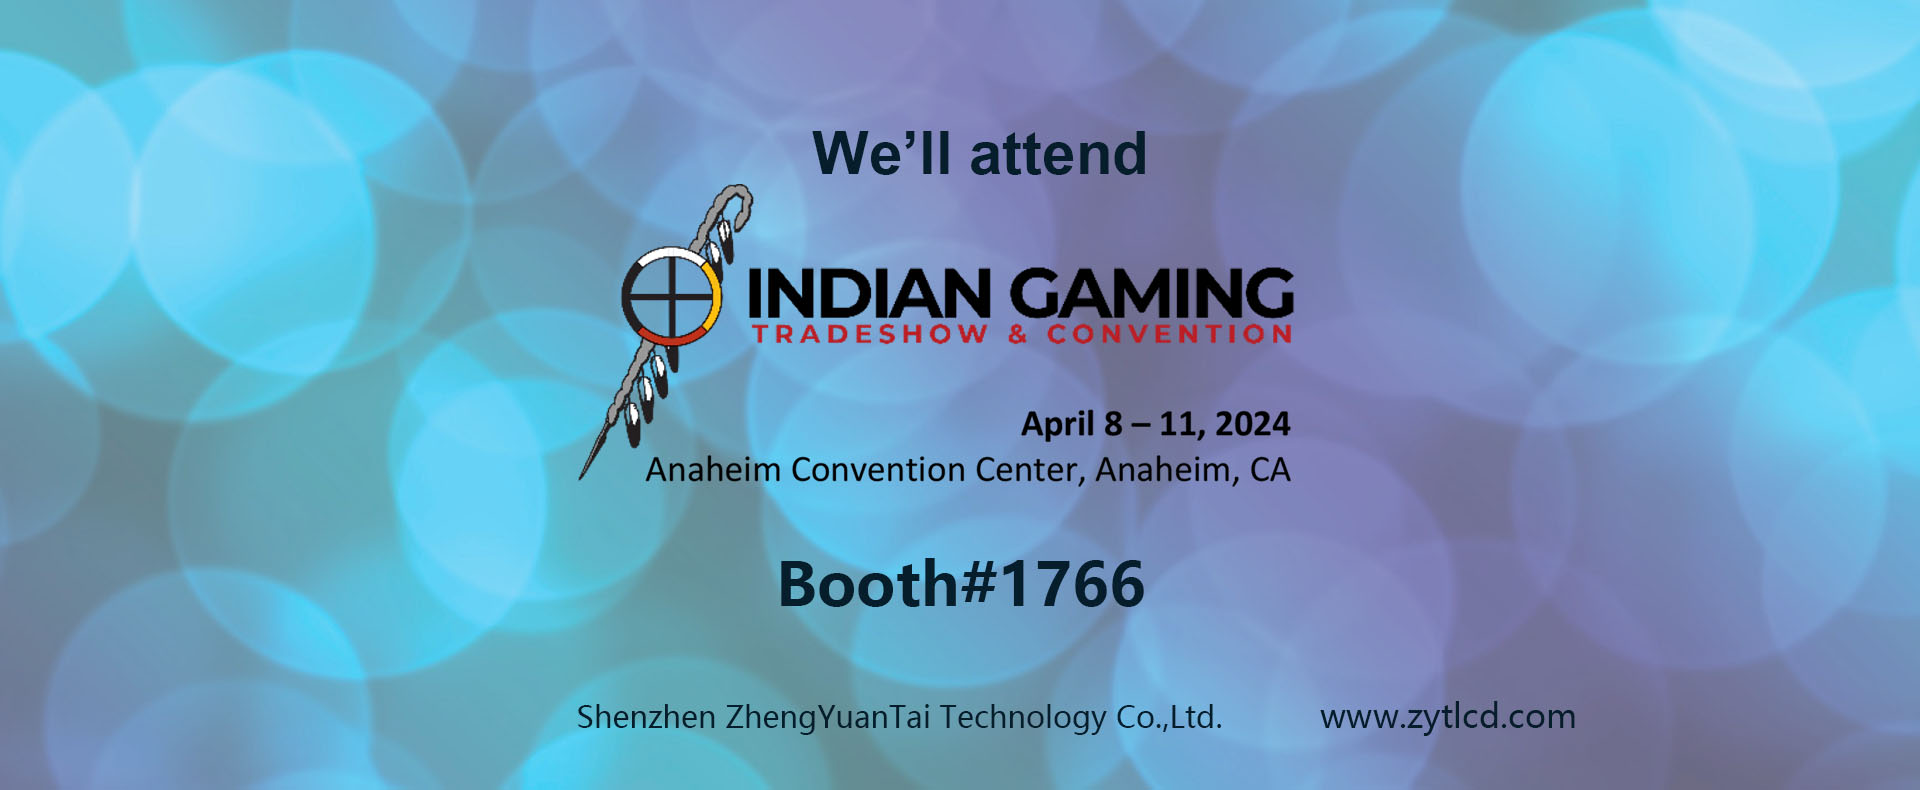 Indian Gaming Show